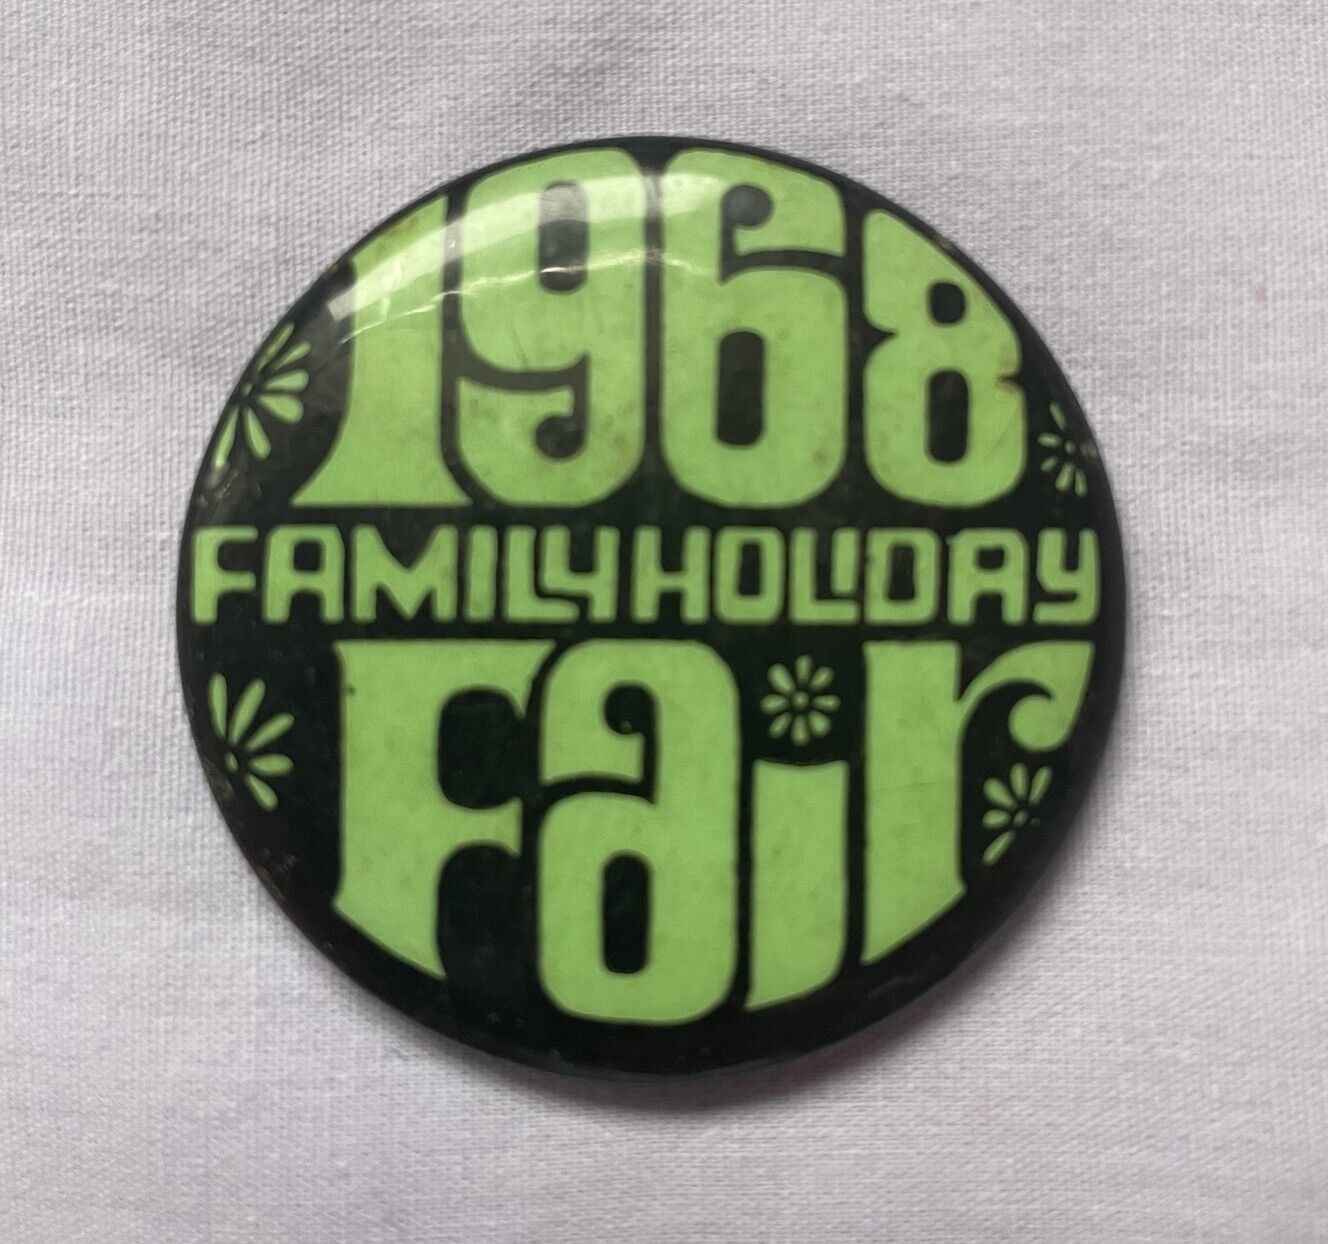 1968 FAMILY HOLIDAY FAIR VINTAGE PINBACK BUTTON - GROOVY HIPPY 60\'s